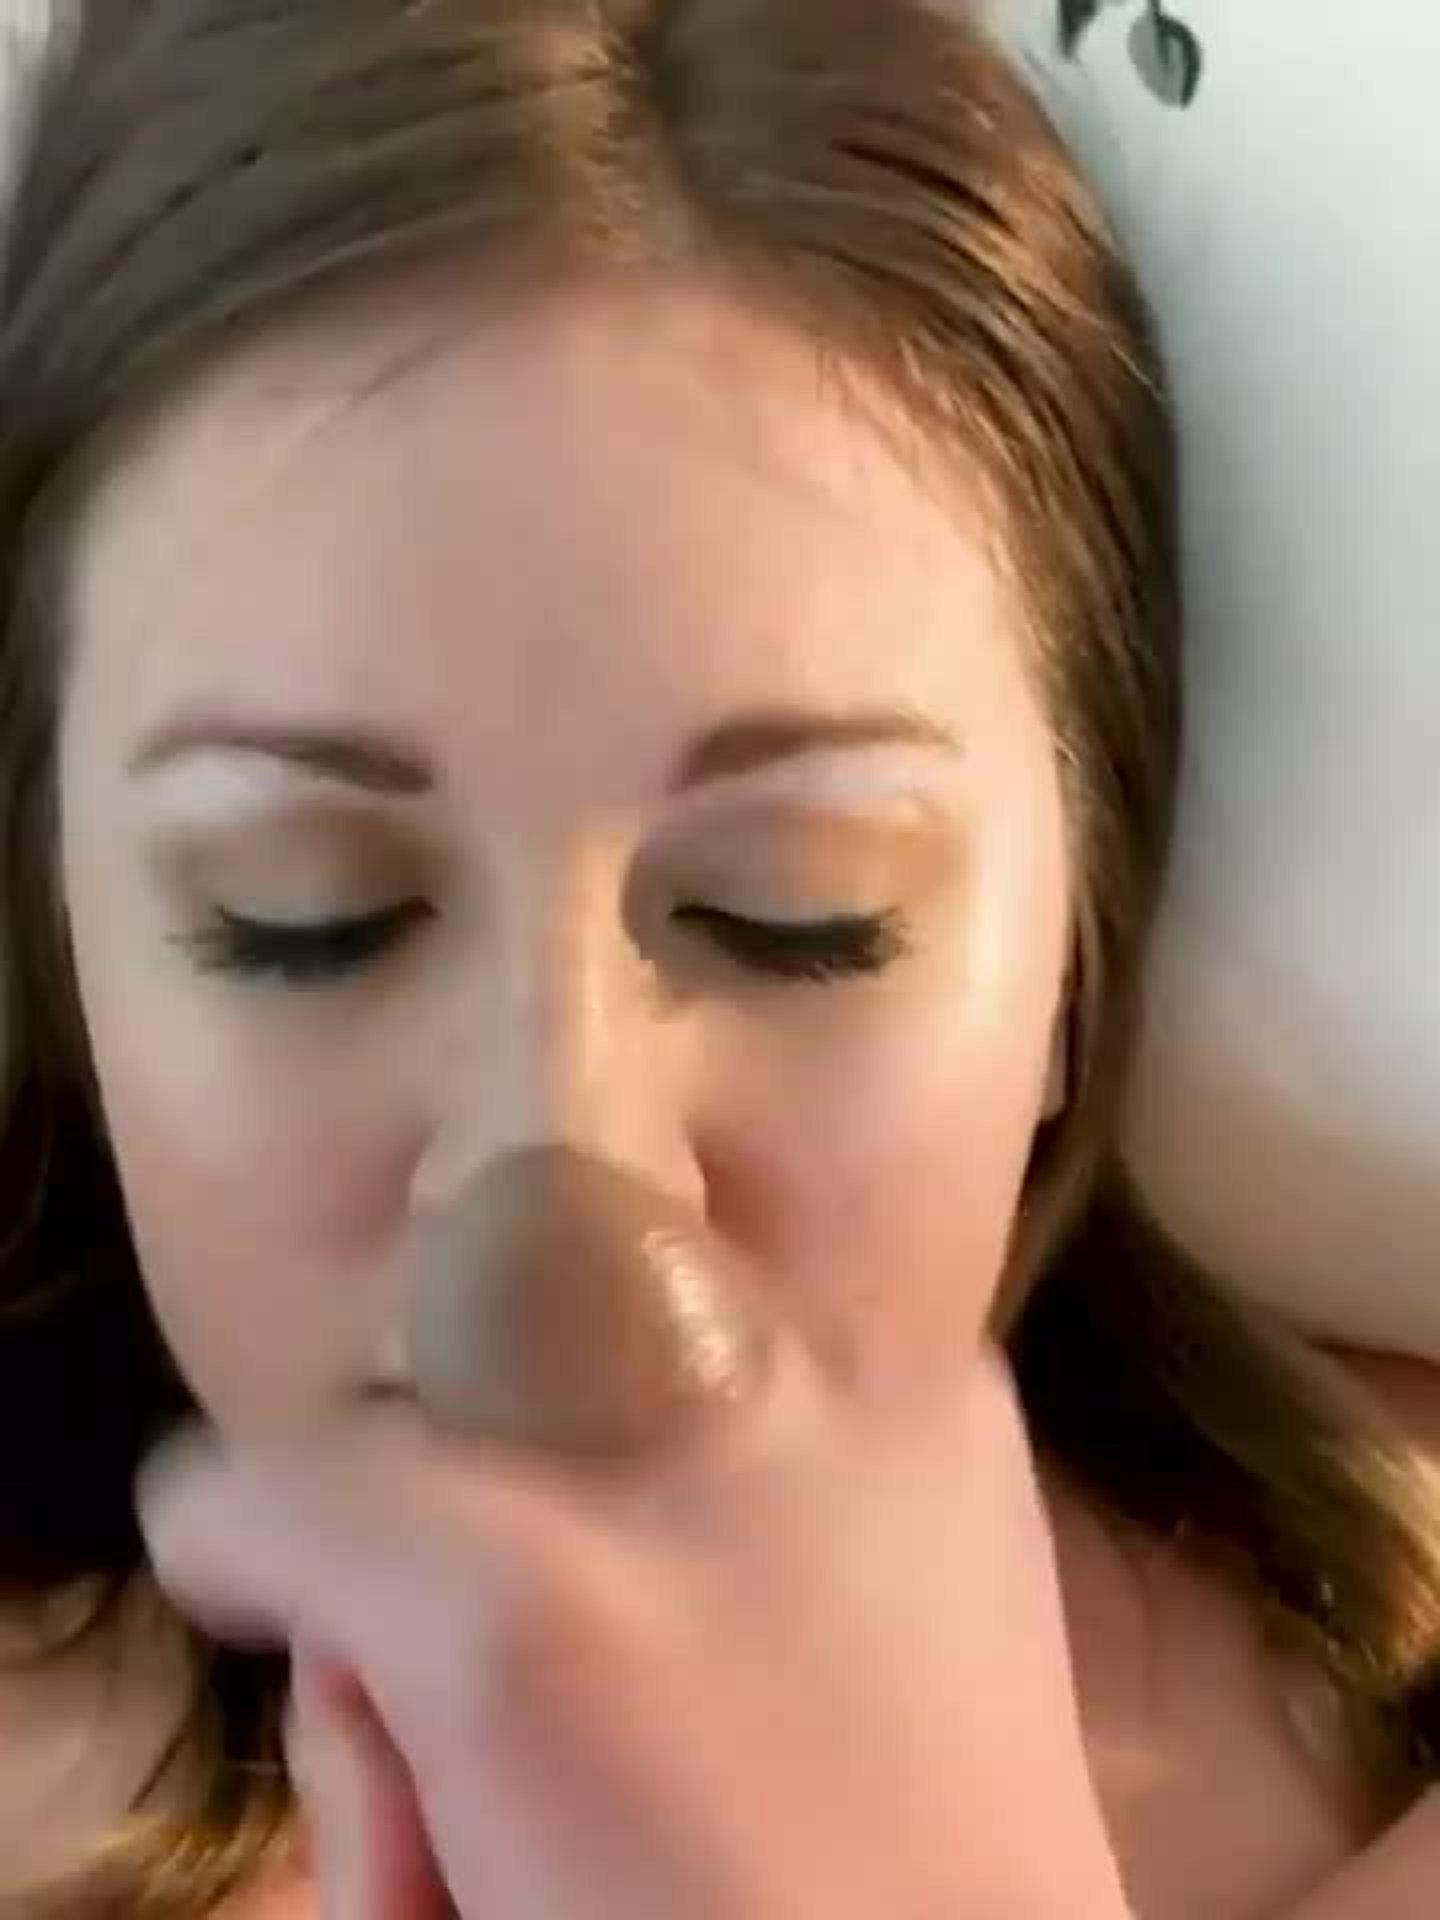 Video by PornLife with the username @pornlife994,  December 2, 2023 at 5:57 AM. The post is about the topic Cum queens and the text says 'Cum queen's face covered with thick cum load as her new makeup 💦💦💦'